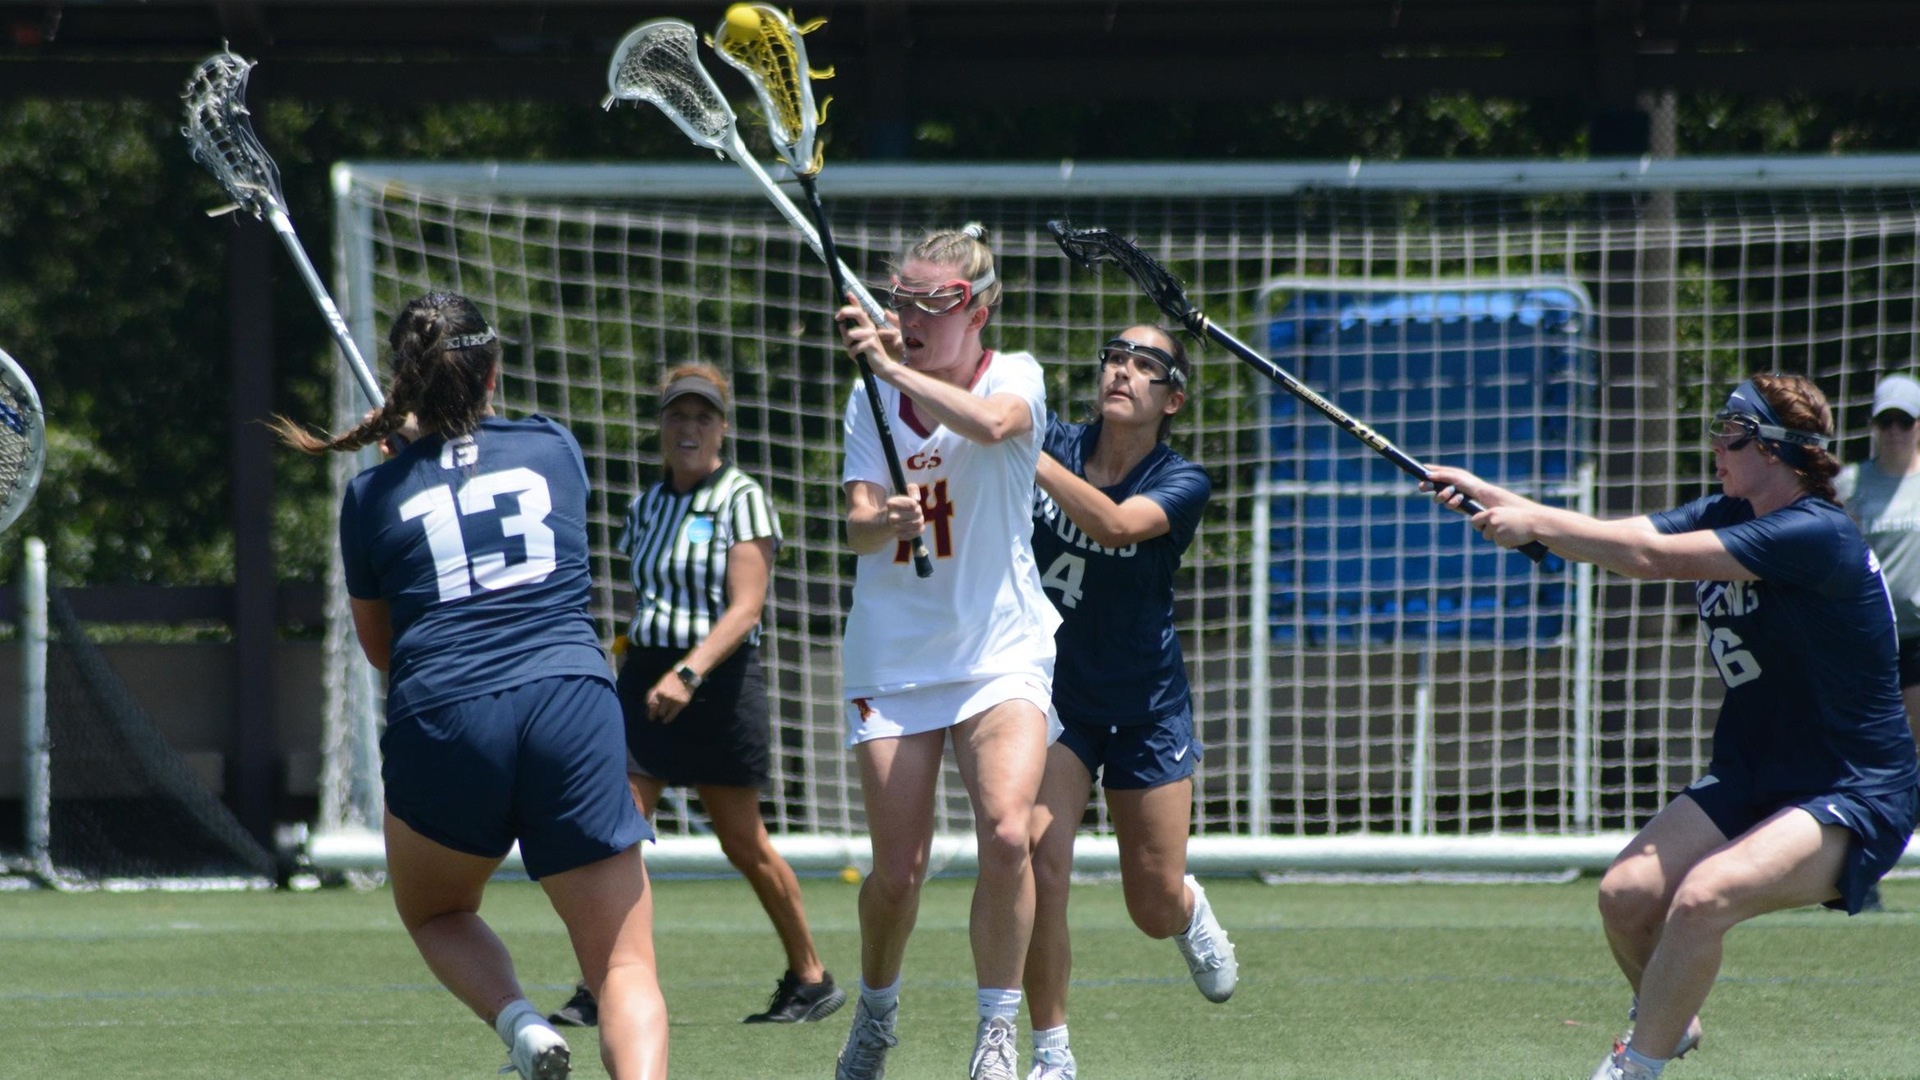 Olivia Carey scoring one of her seven goals on the day